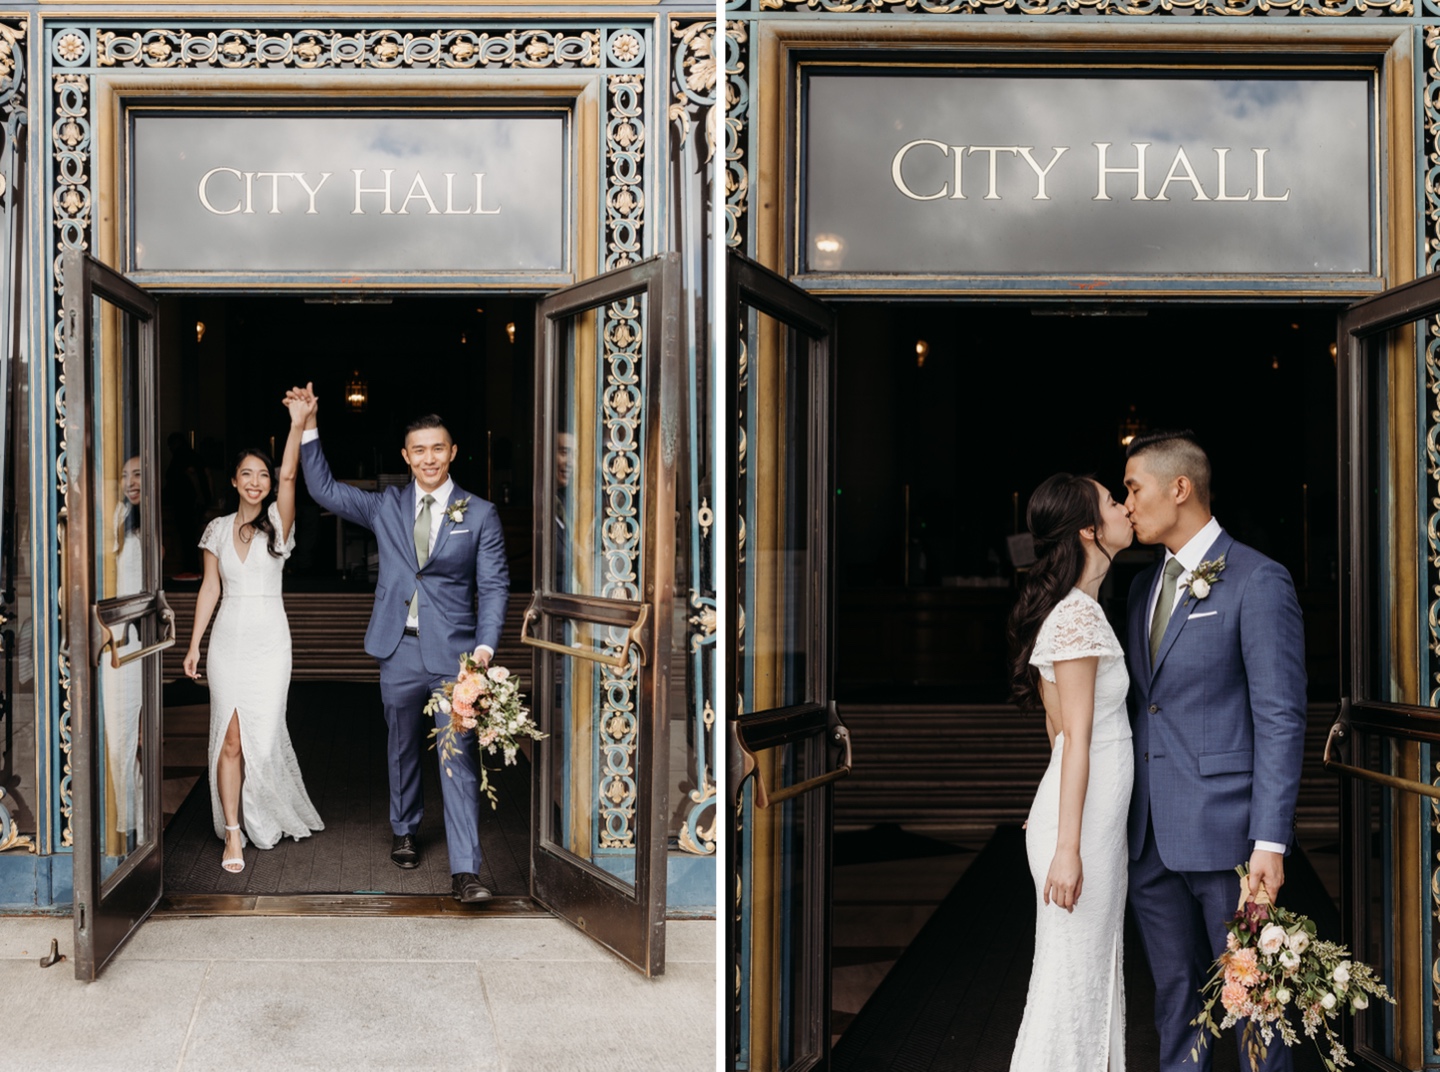 Bride and groom walk out of San Francisco City Hall under the City Hall sign and kiss while the groom holds the bouquet of flowers. 